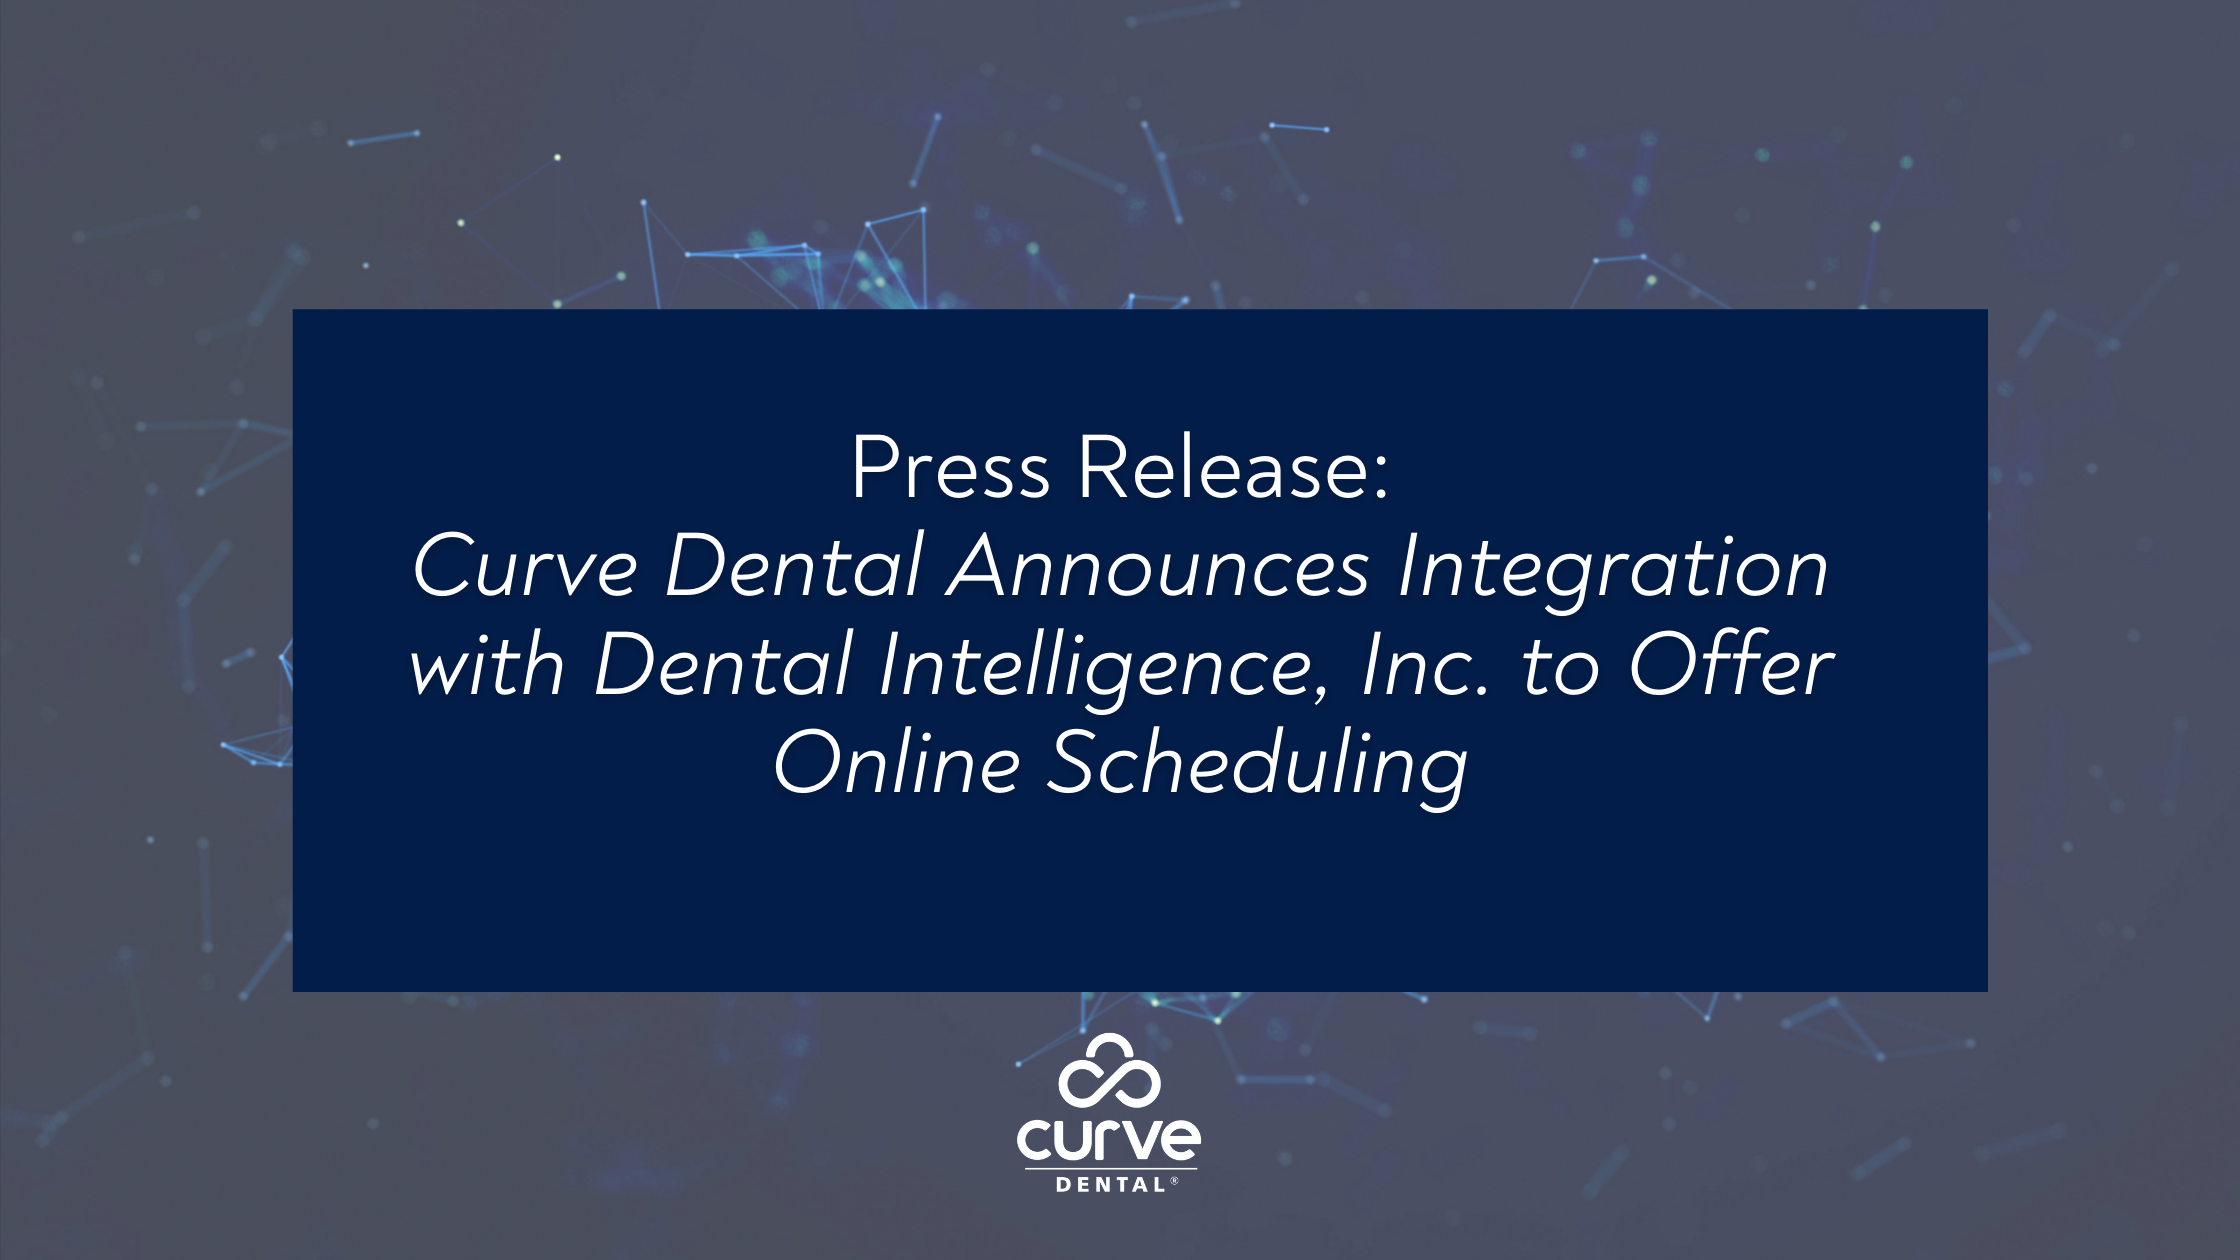 Curve Dental Announces Integration with Dental Intelligence, Inc. to Offer Online Scheduling